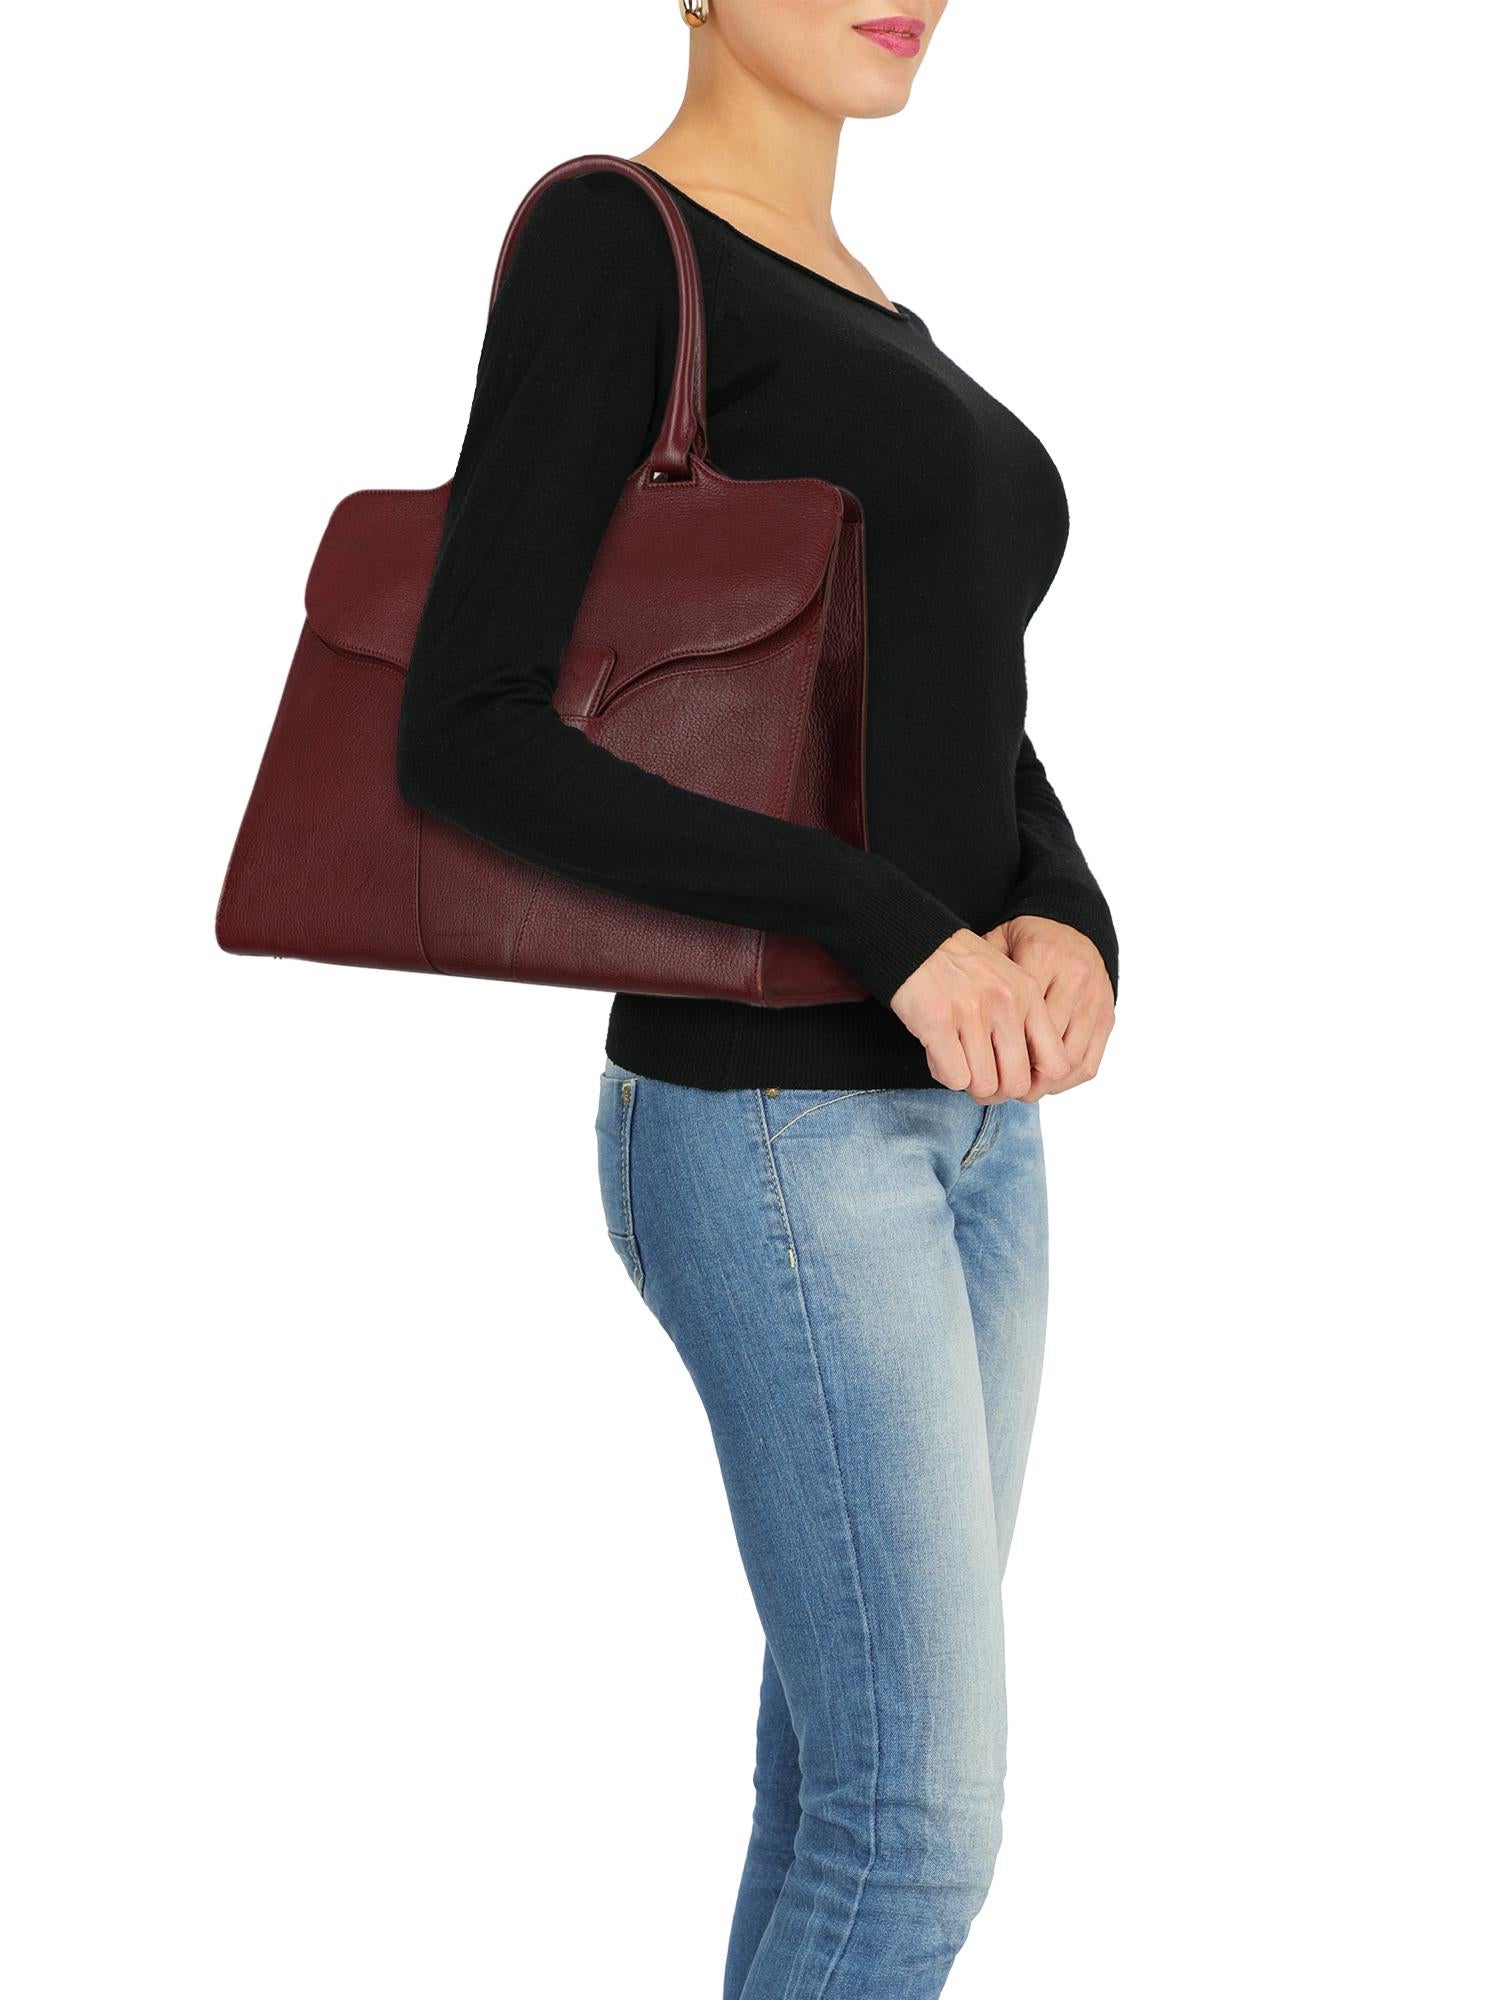 Product Description: Tote bag, leather, solid color, front logo, magnetic closure, external pocket, internal pockets

Includes:
Dust bag

Product Condition: Very Good
Lining: negligible residues, visible stains. Hardware: negligible scratches.